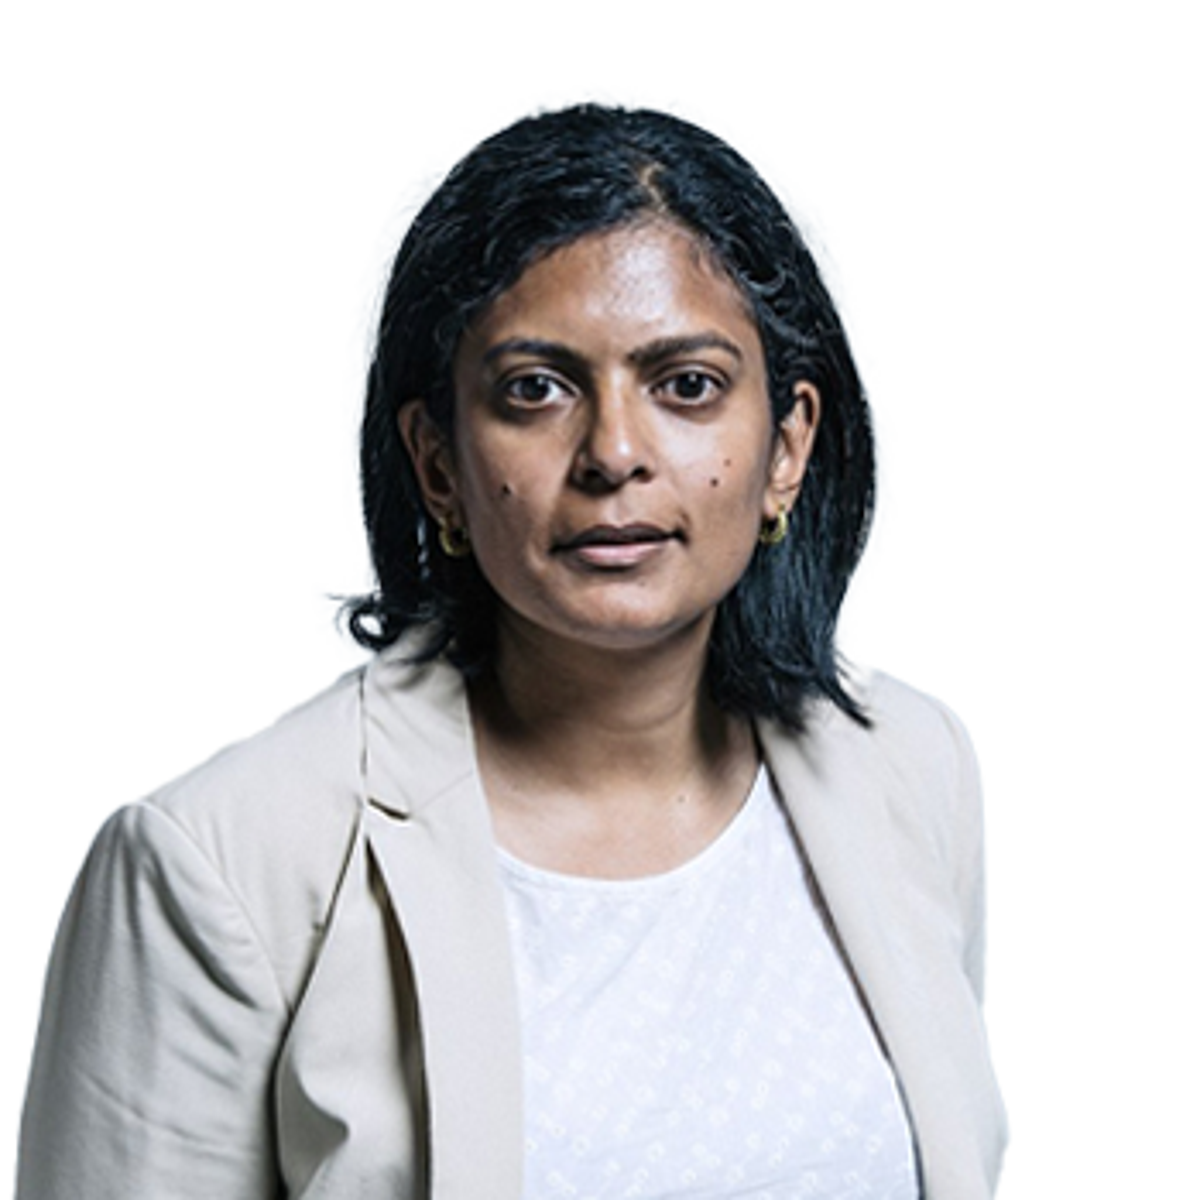 Sources in Rupa Huq’s native celebration name for her to lose whip after calling Kwarteng ‘superficially’ black